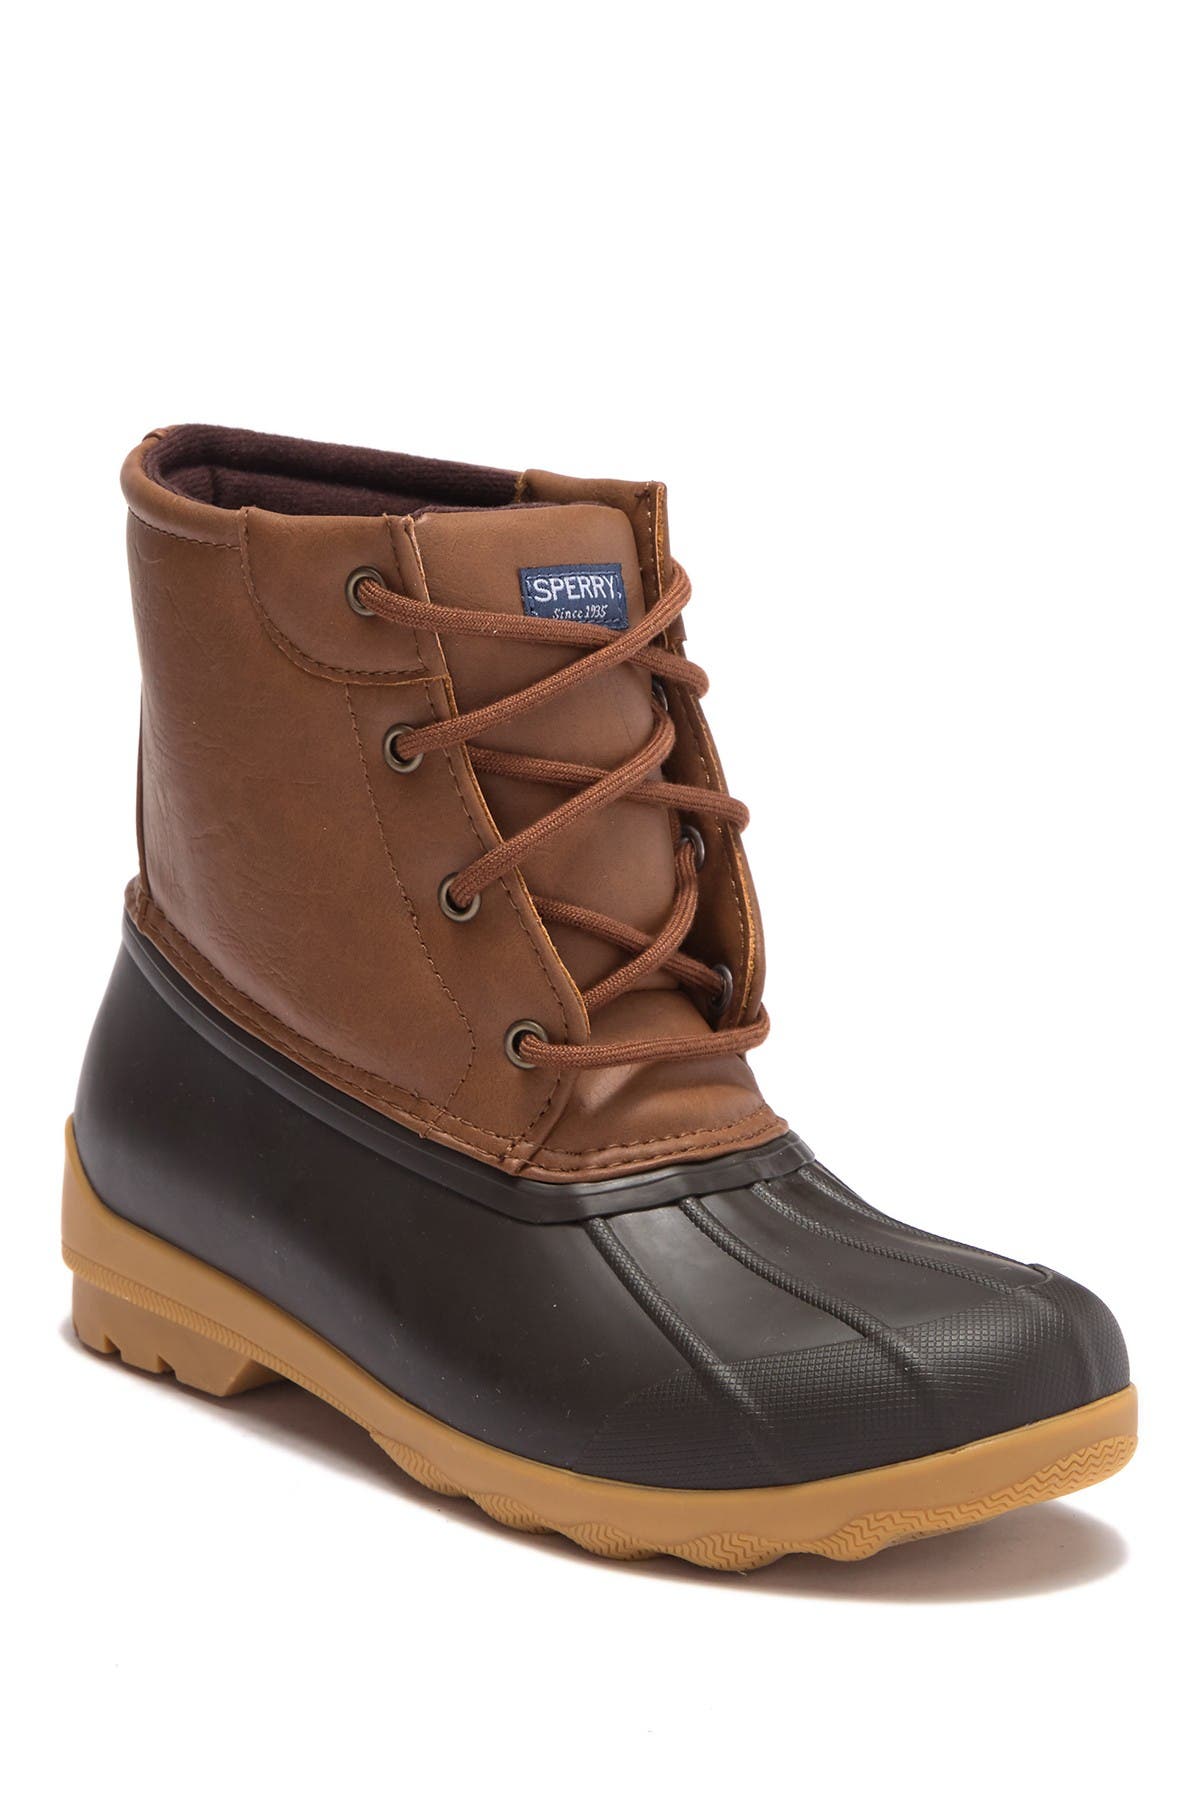 Sperry Boots for Boys | Nordstrom Rack